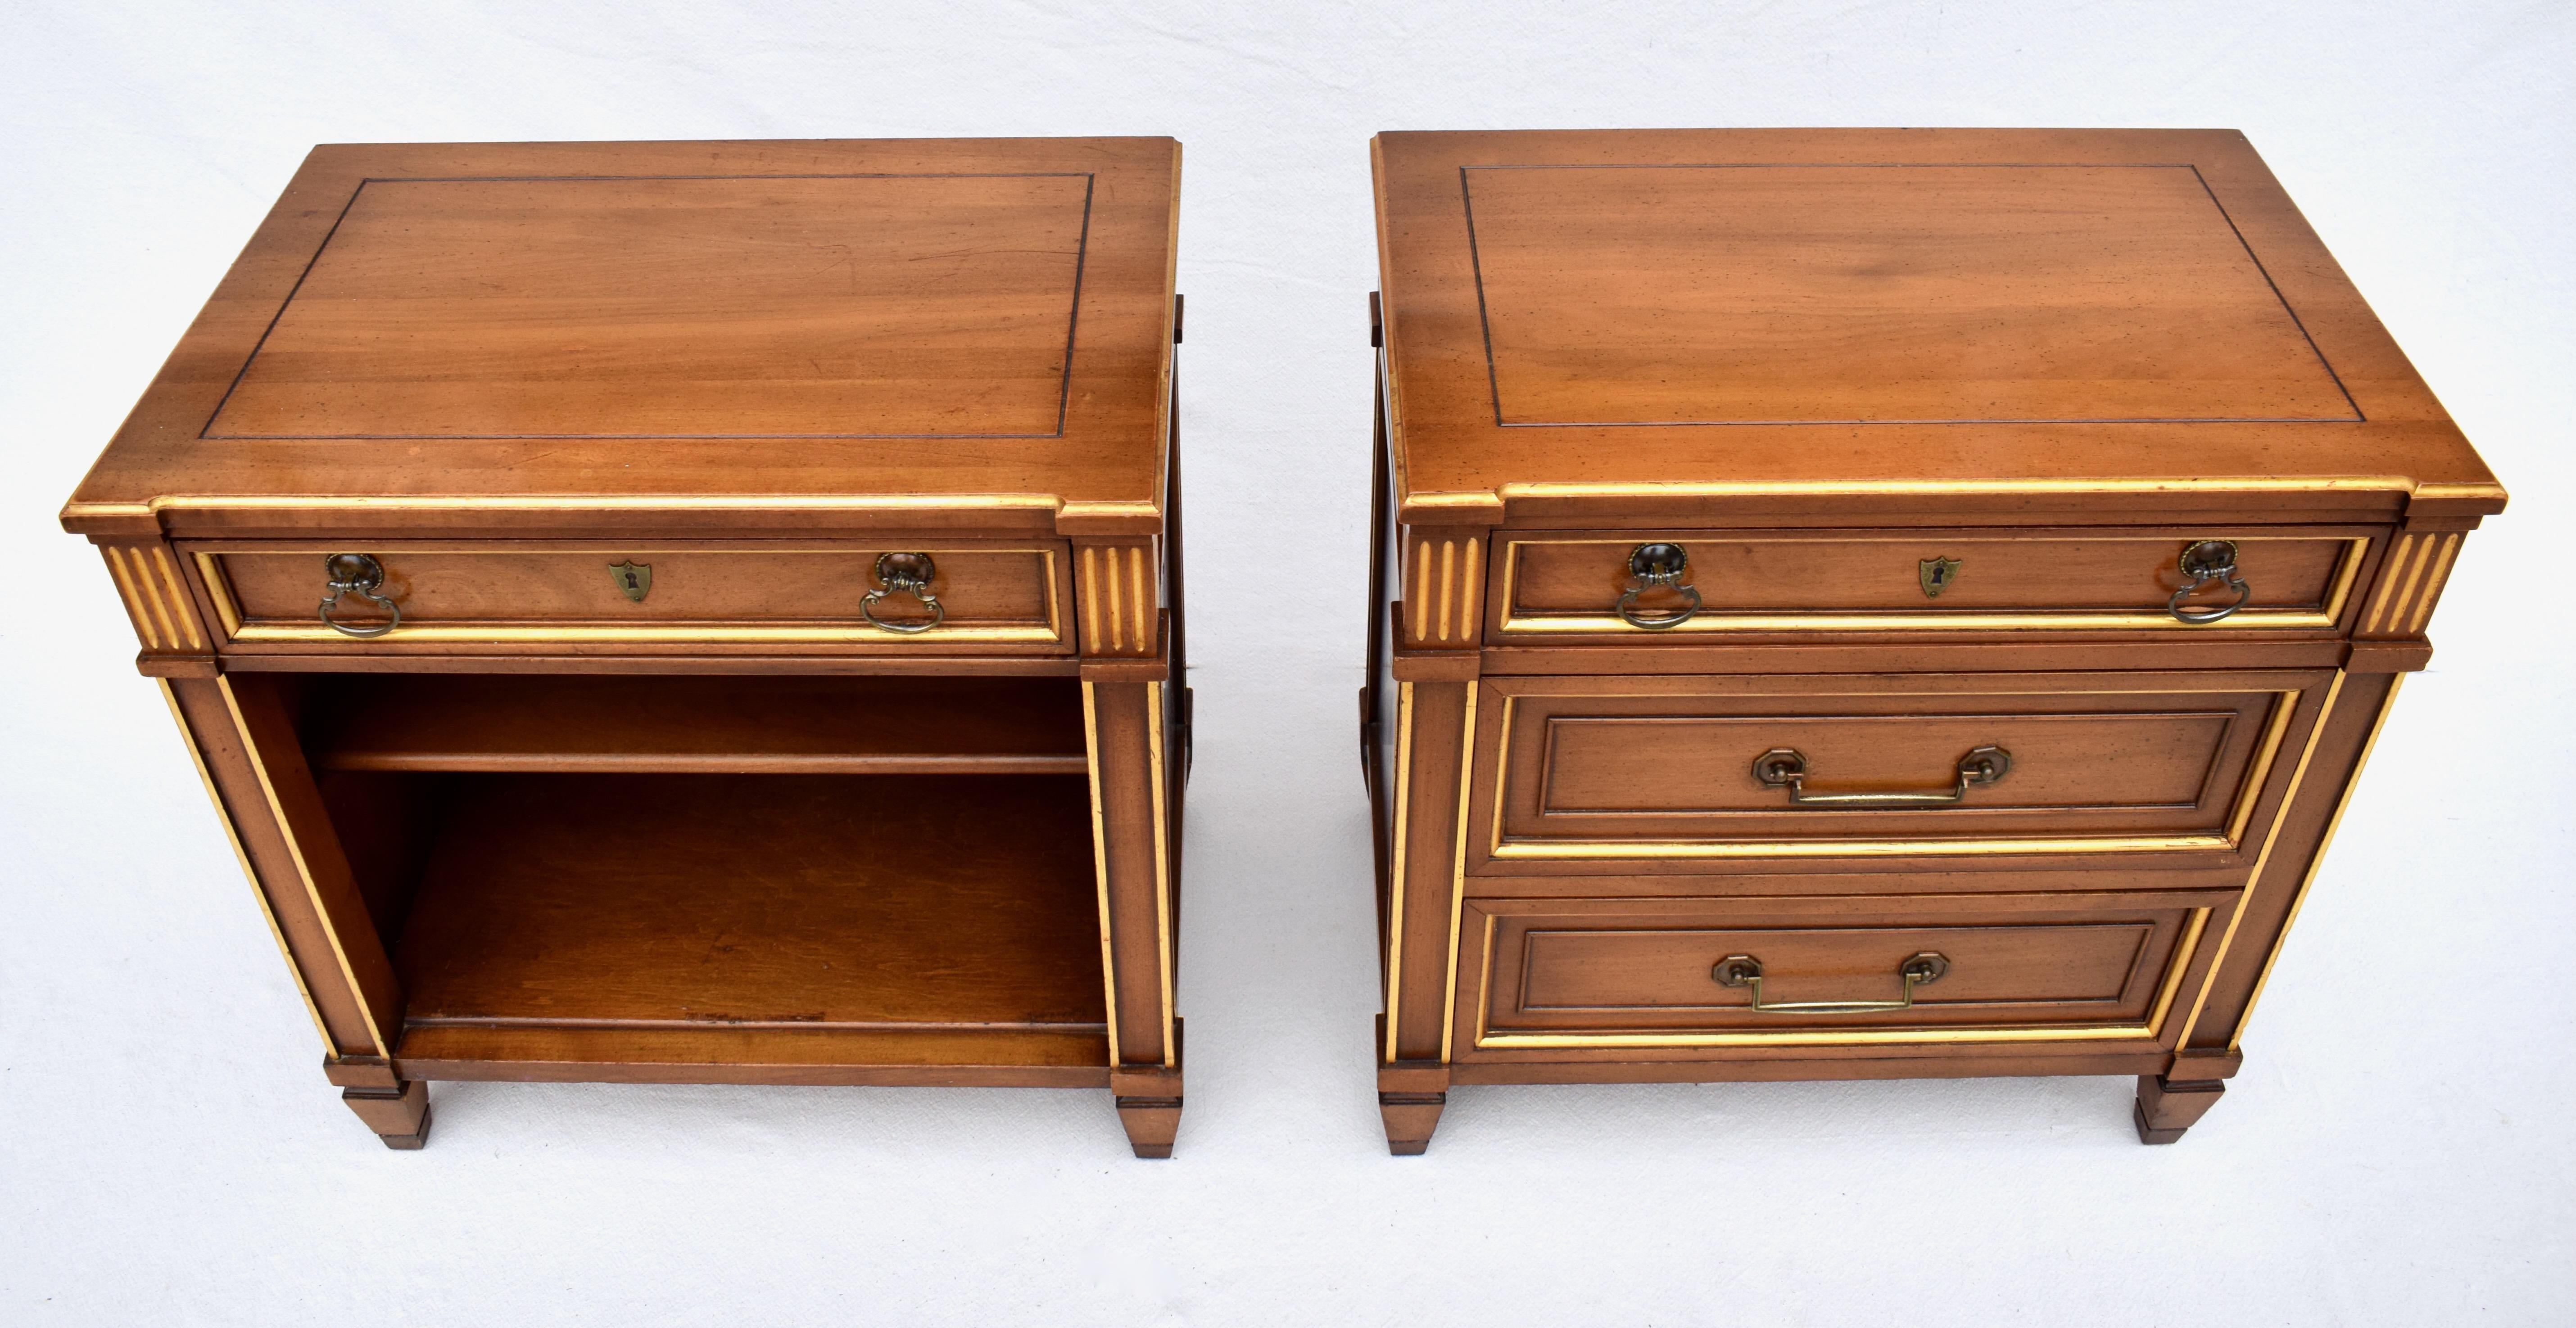 A pair of Italian Directoire style nightstands featuring notched tops with parcel gilt accents including fluted side posts raised on tapered feet. This is a matching pair in form, each having distinctly unique functional drawer & shelving options.